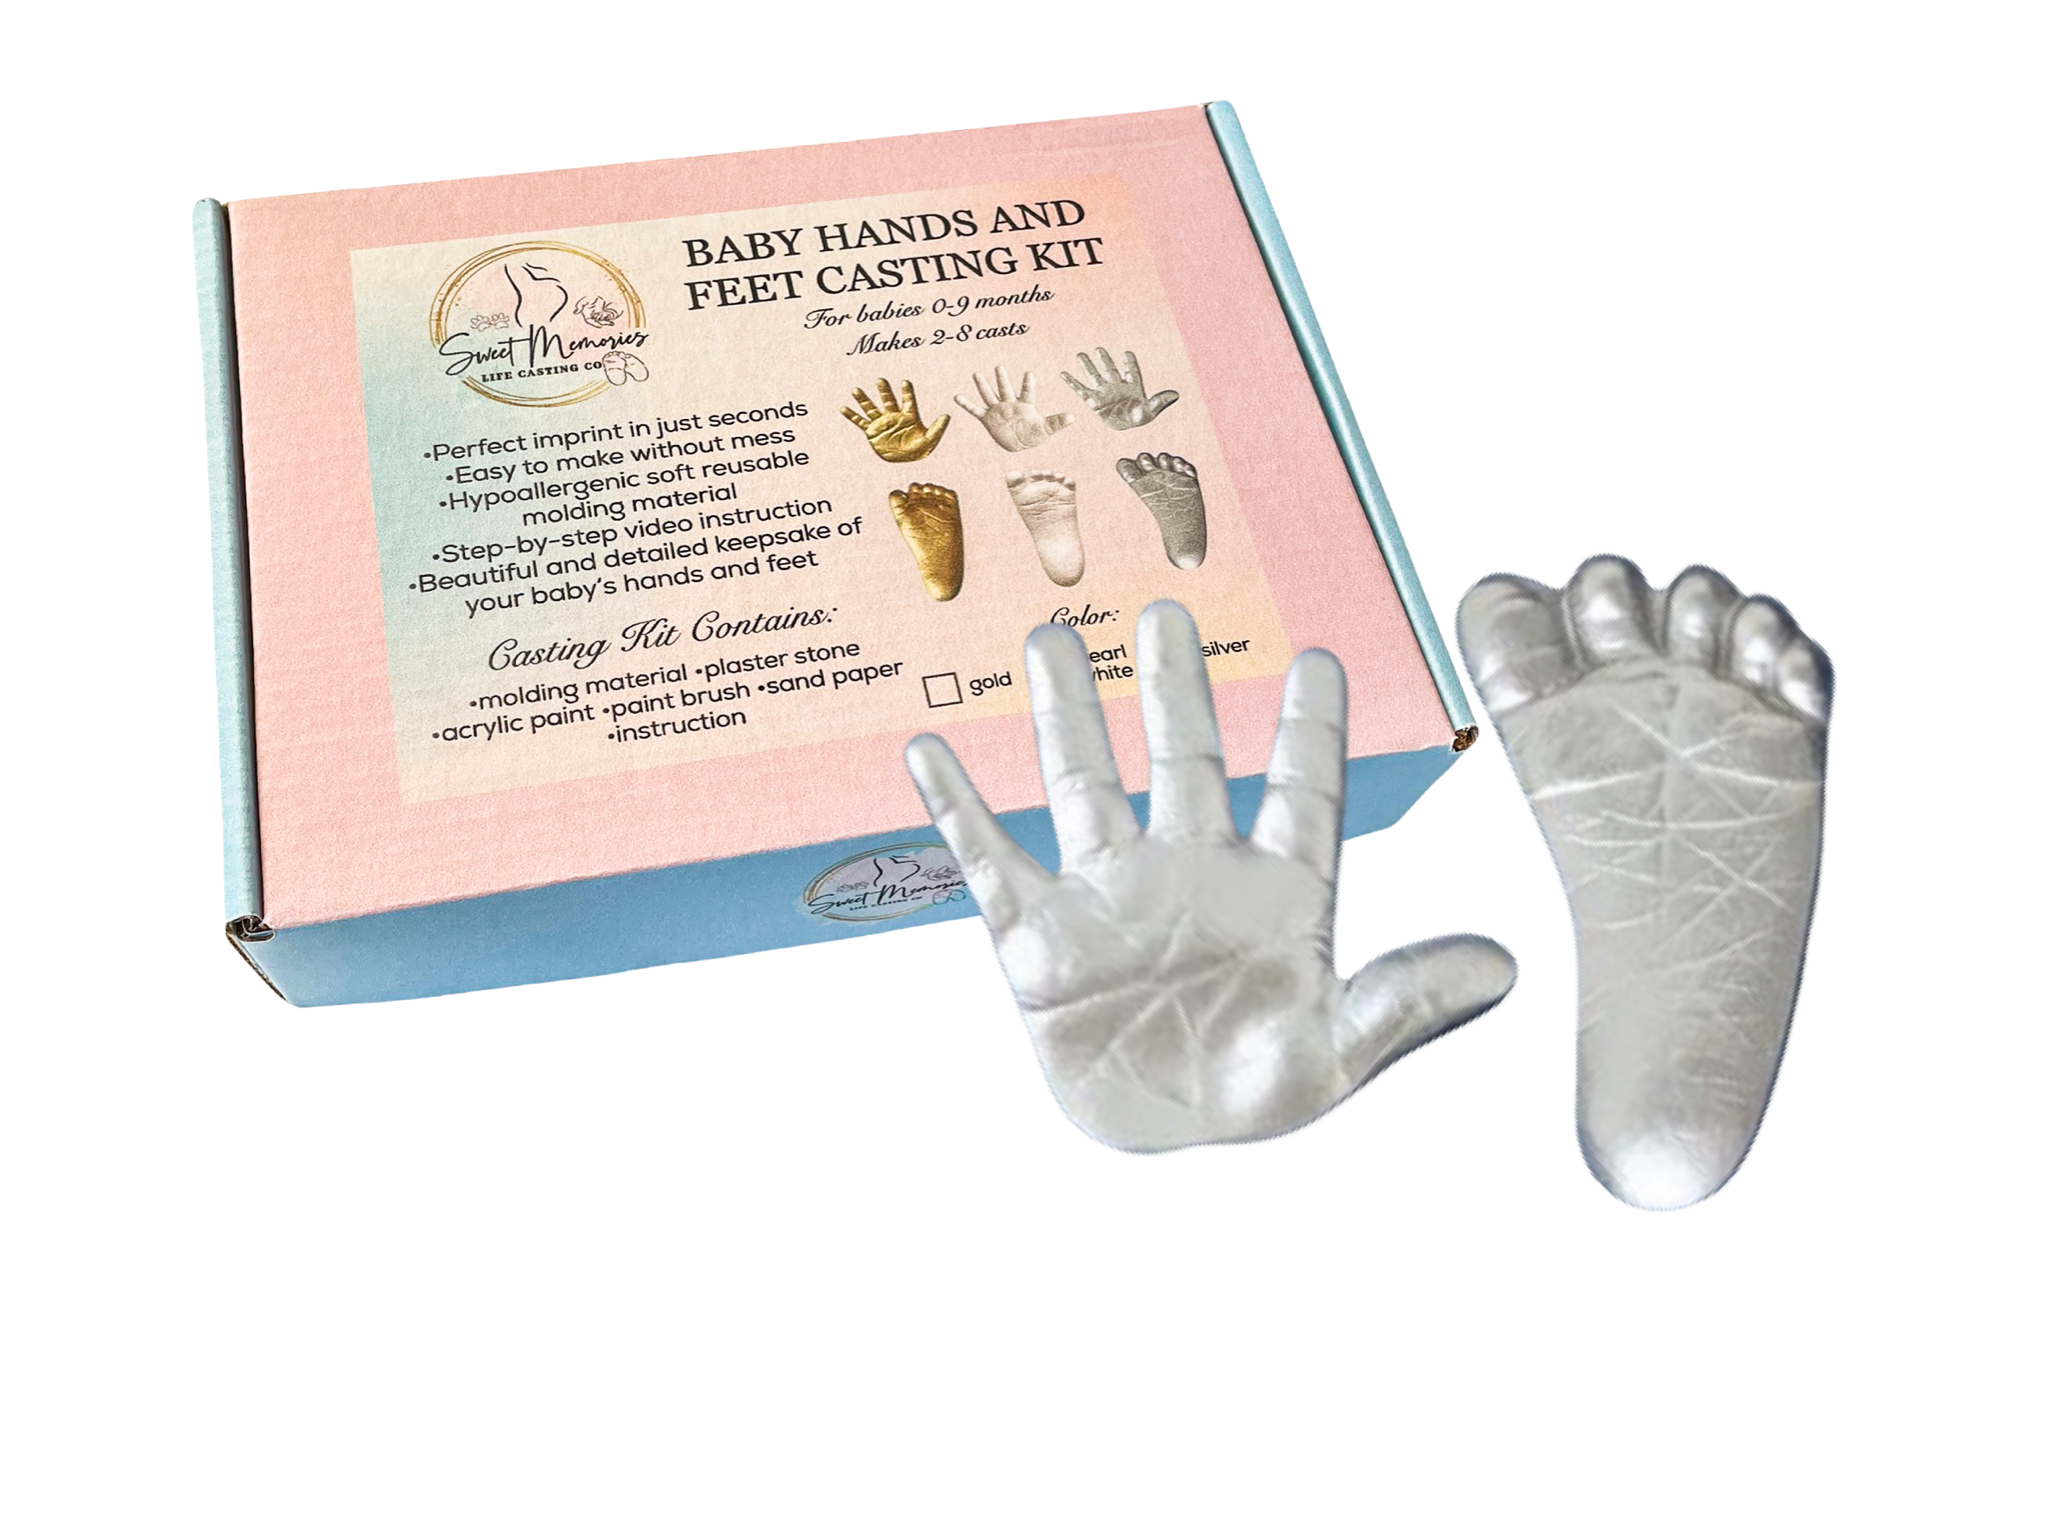 Sweet Memories baby hands and feet casting kit for babies 0-9